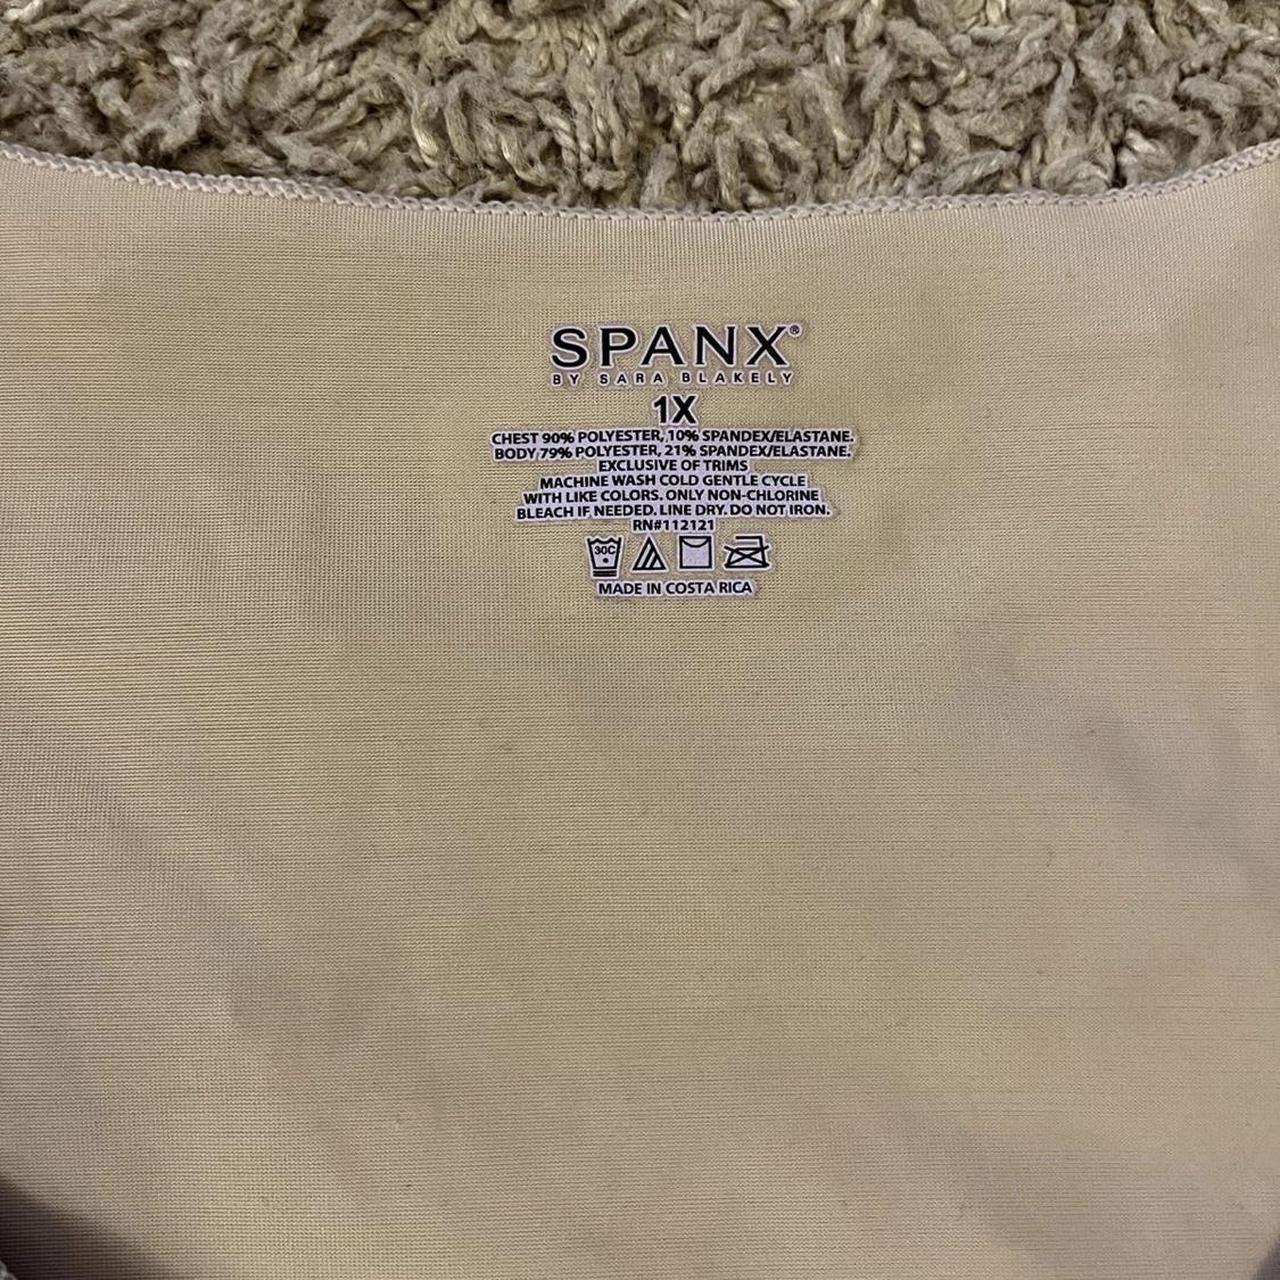 Spanx shapewear tank size 1X in good condition from - Depop